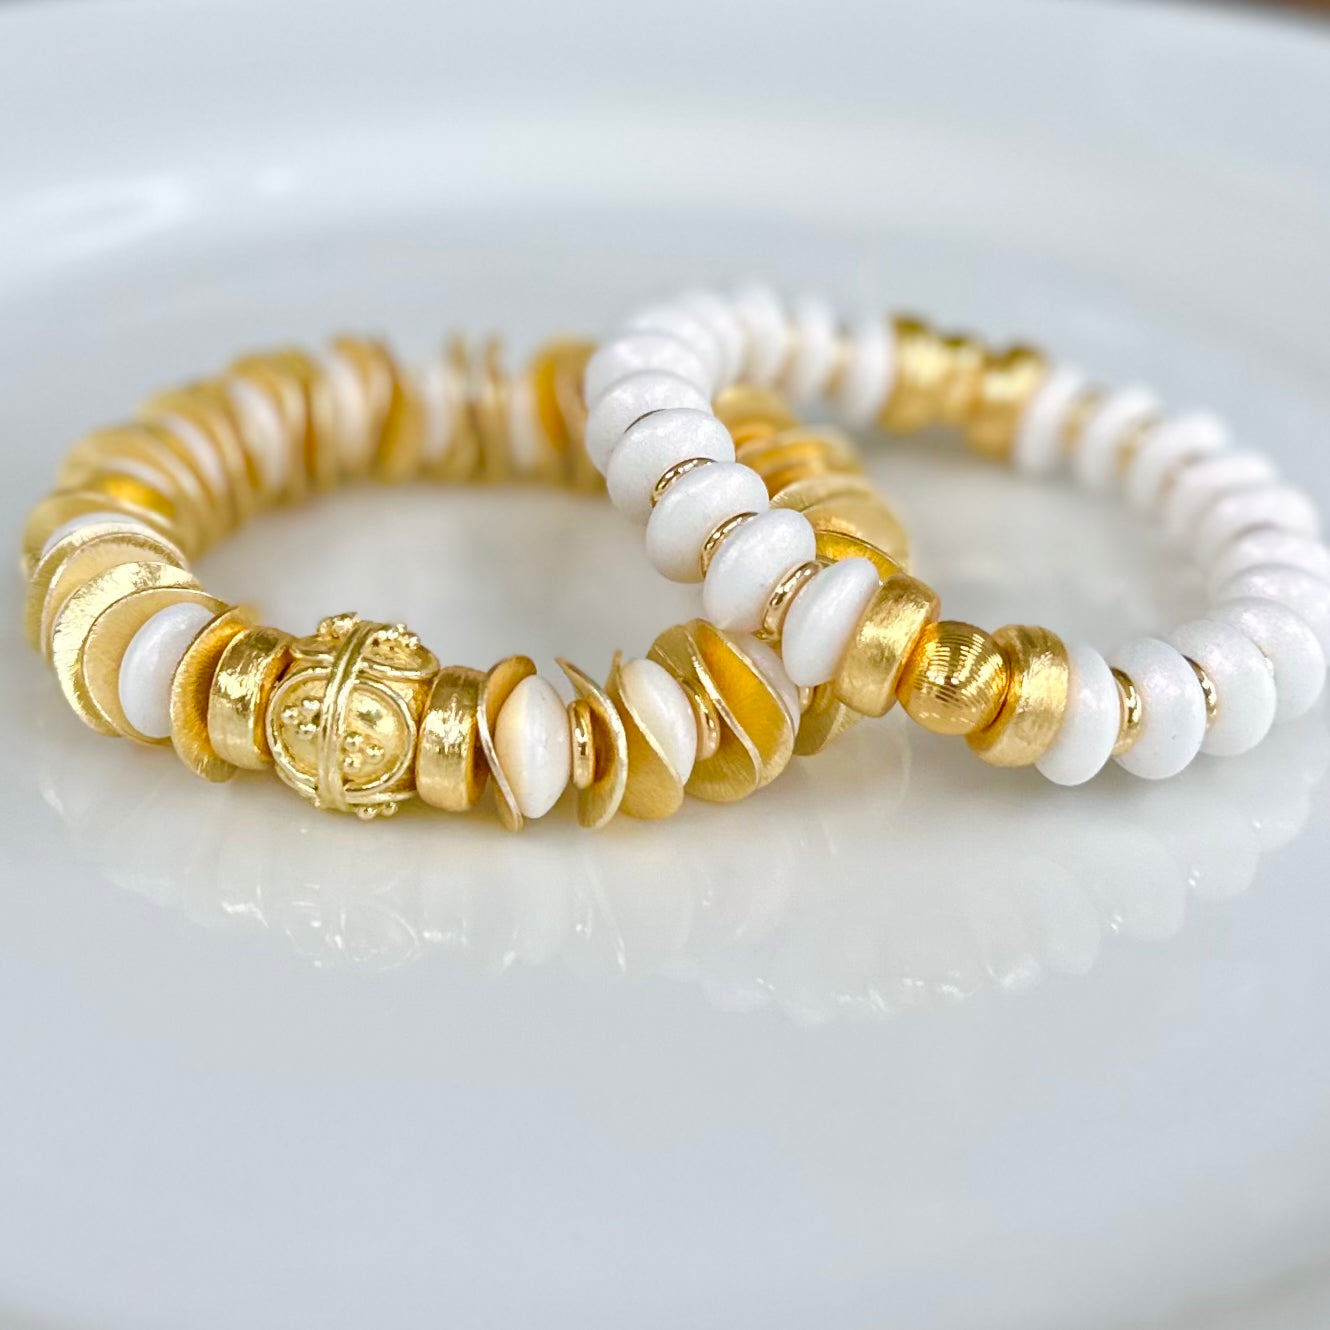 NEW! OPALIZED WHITE COIL BRACELET WITH GOLD ACCENTS